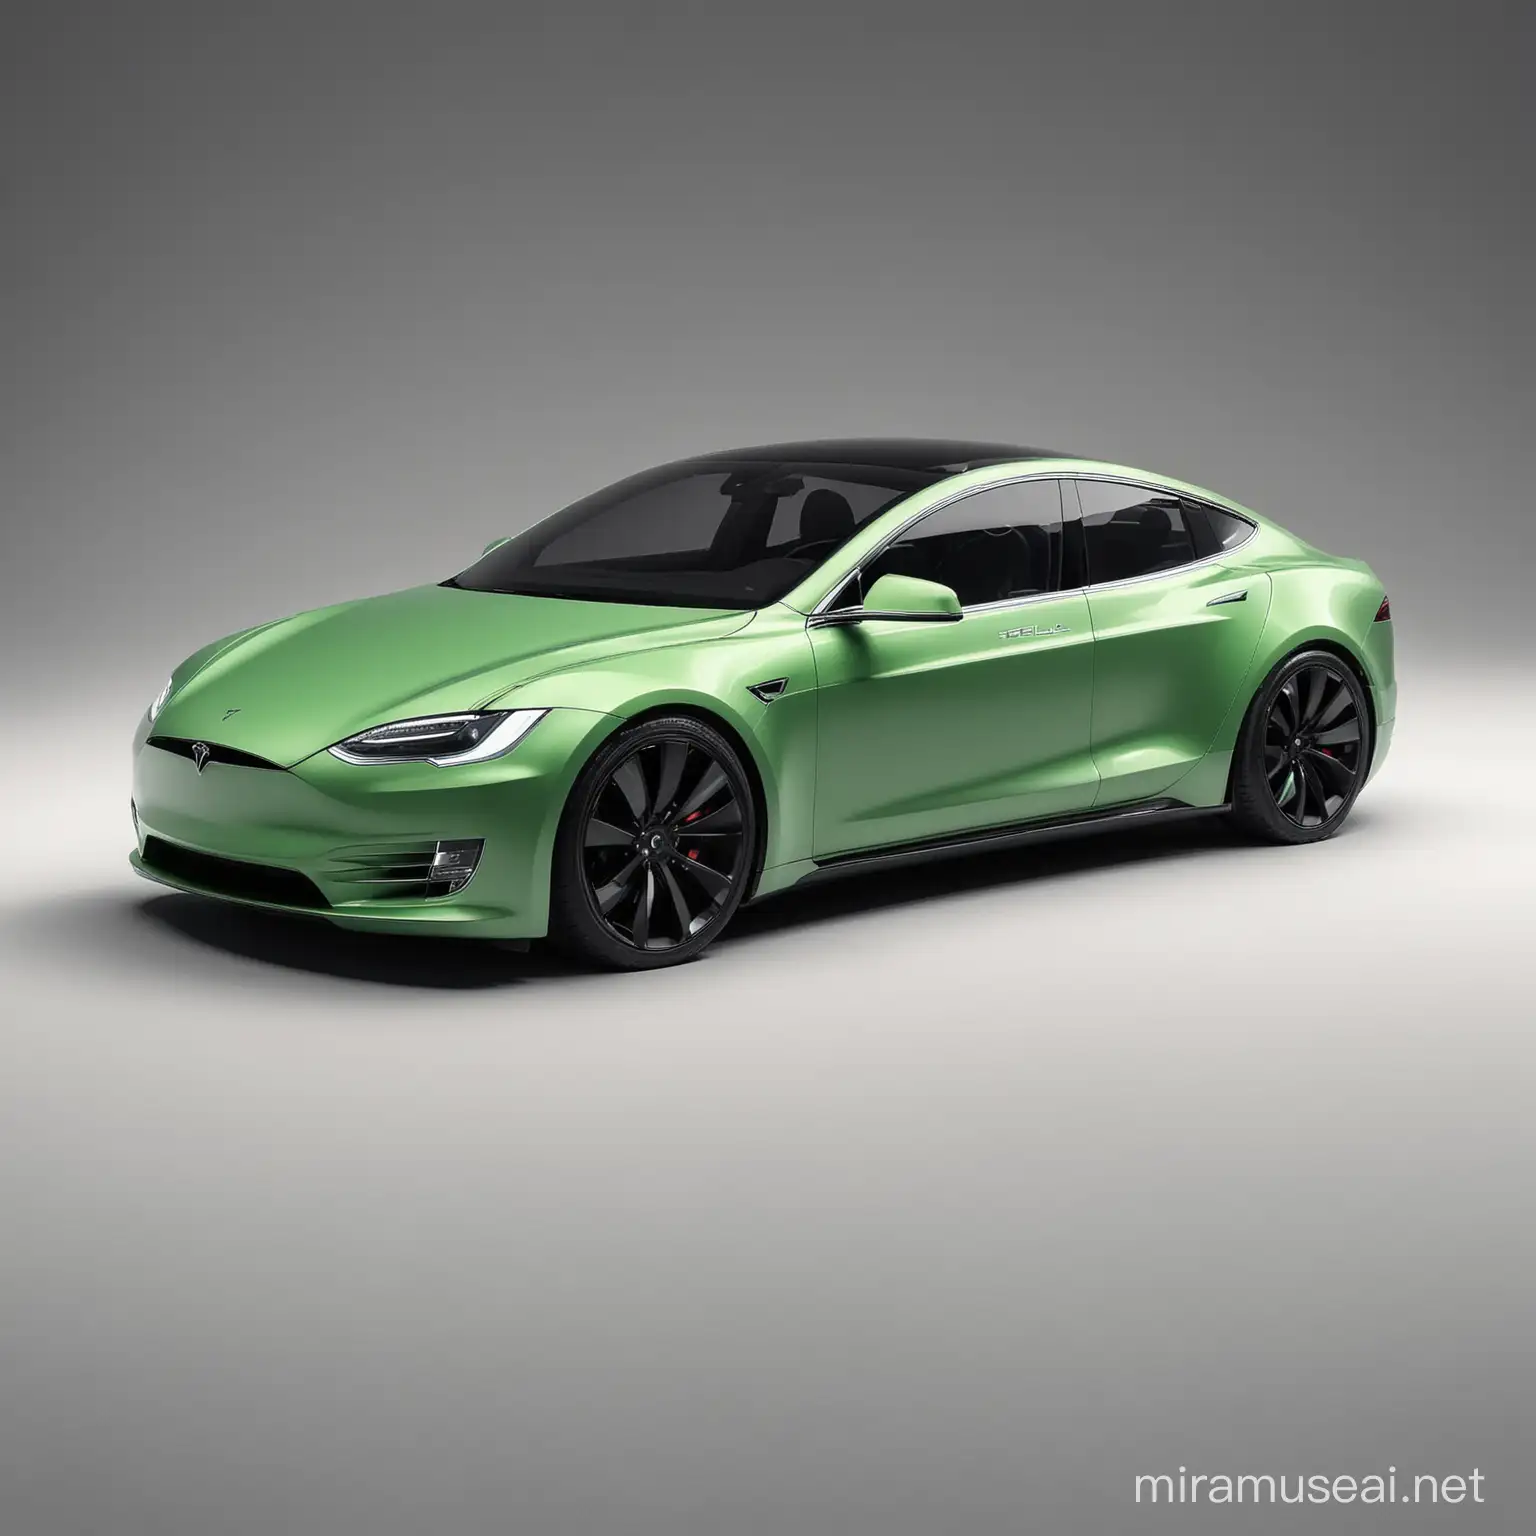 Car Tesla model colored in light green, and logo FIZI on one back in white black color